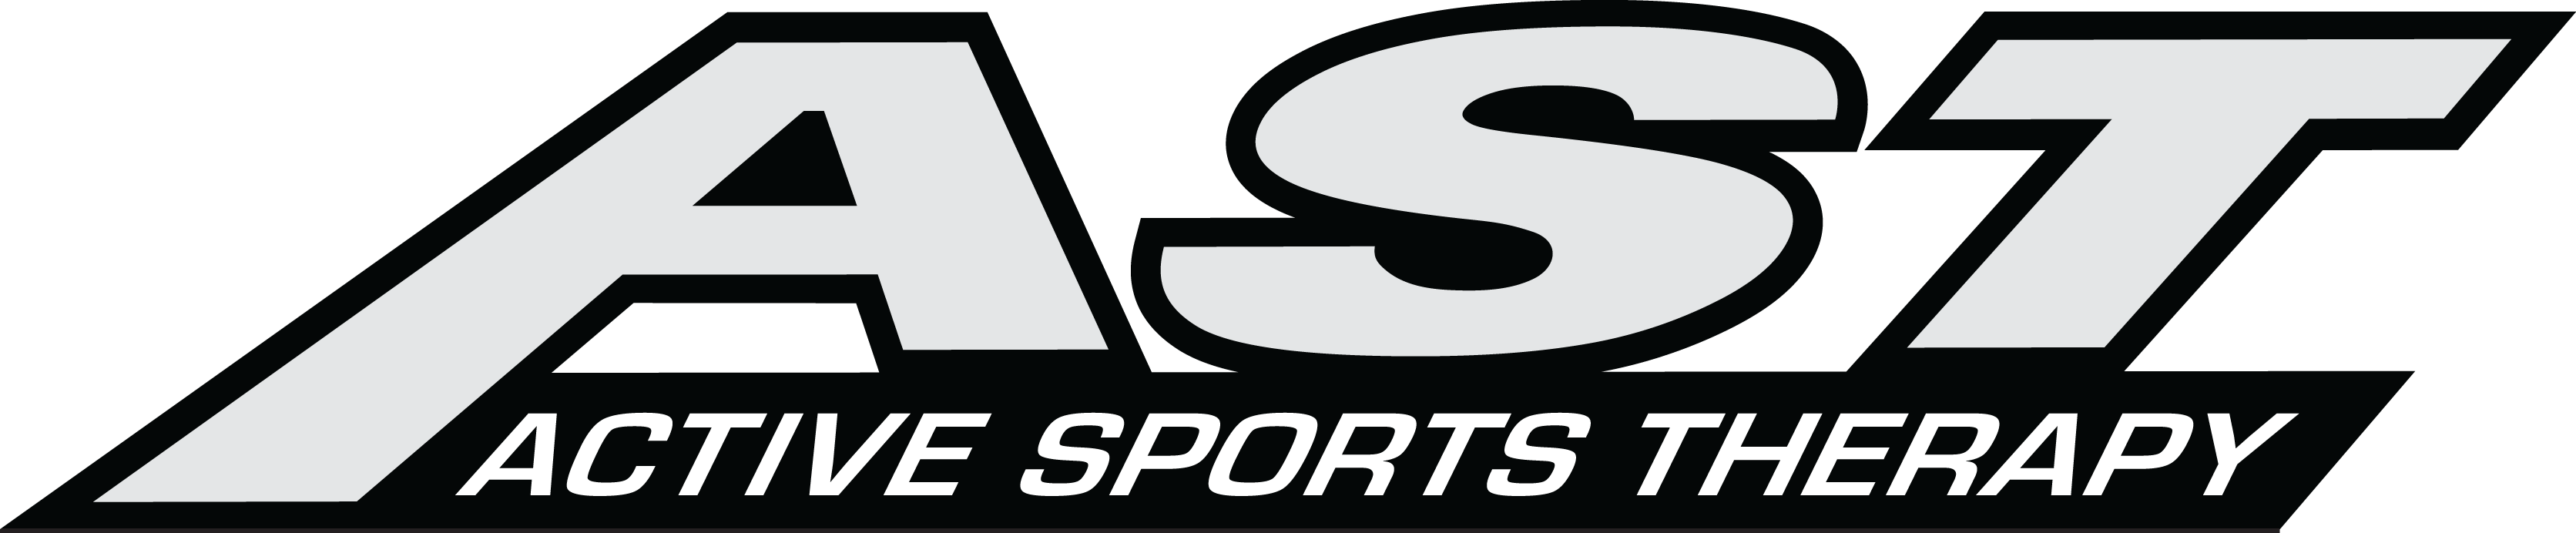 active sports therapy logo